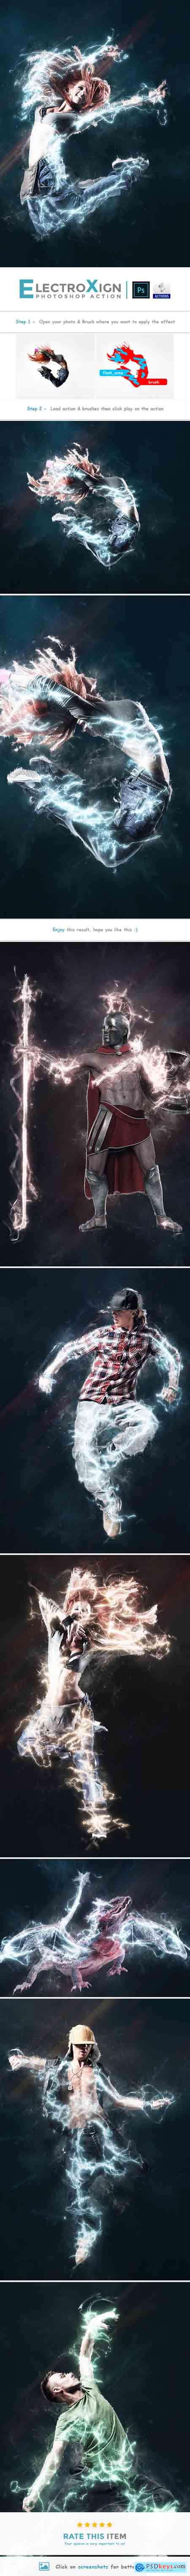 Graphicriver ElectroXign PS Action